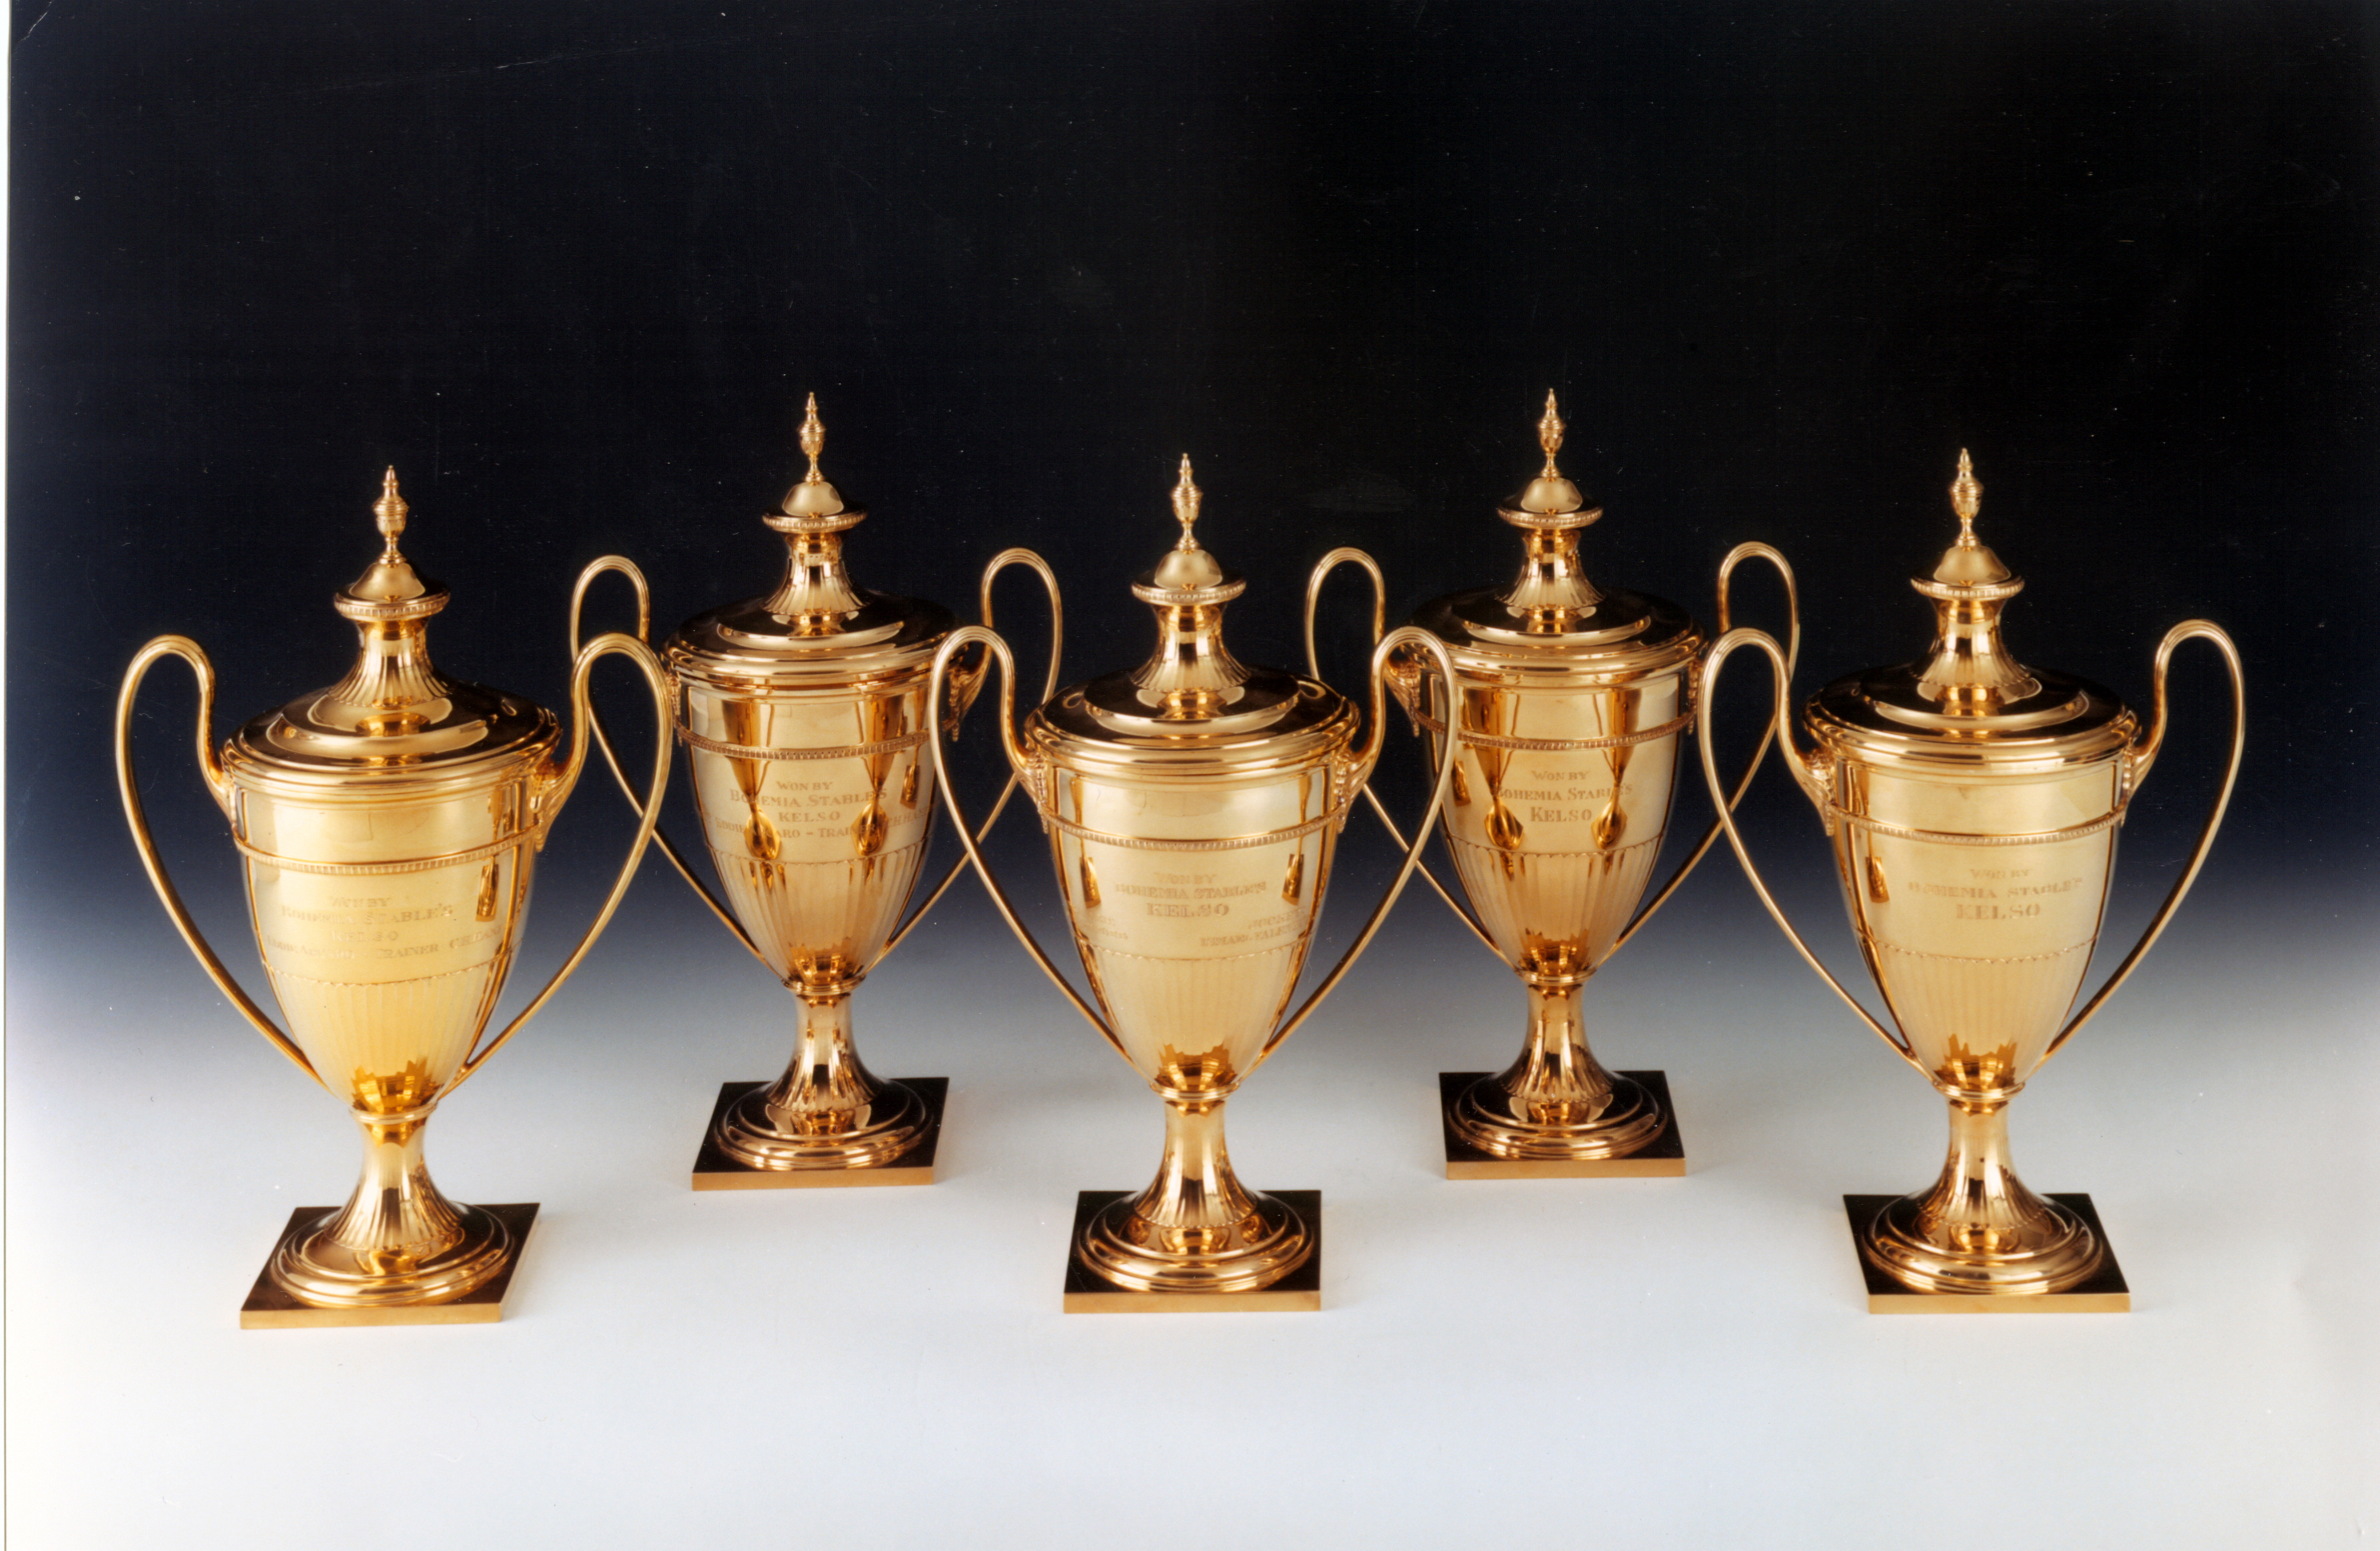 1979.3.1-.5: Jockey Club Gold Cup trophies (1960-1964), won by Kelso, Gift: Mrs. Richard C. duPont 